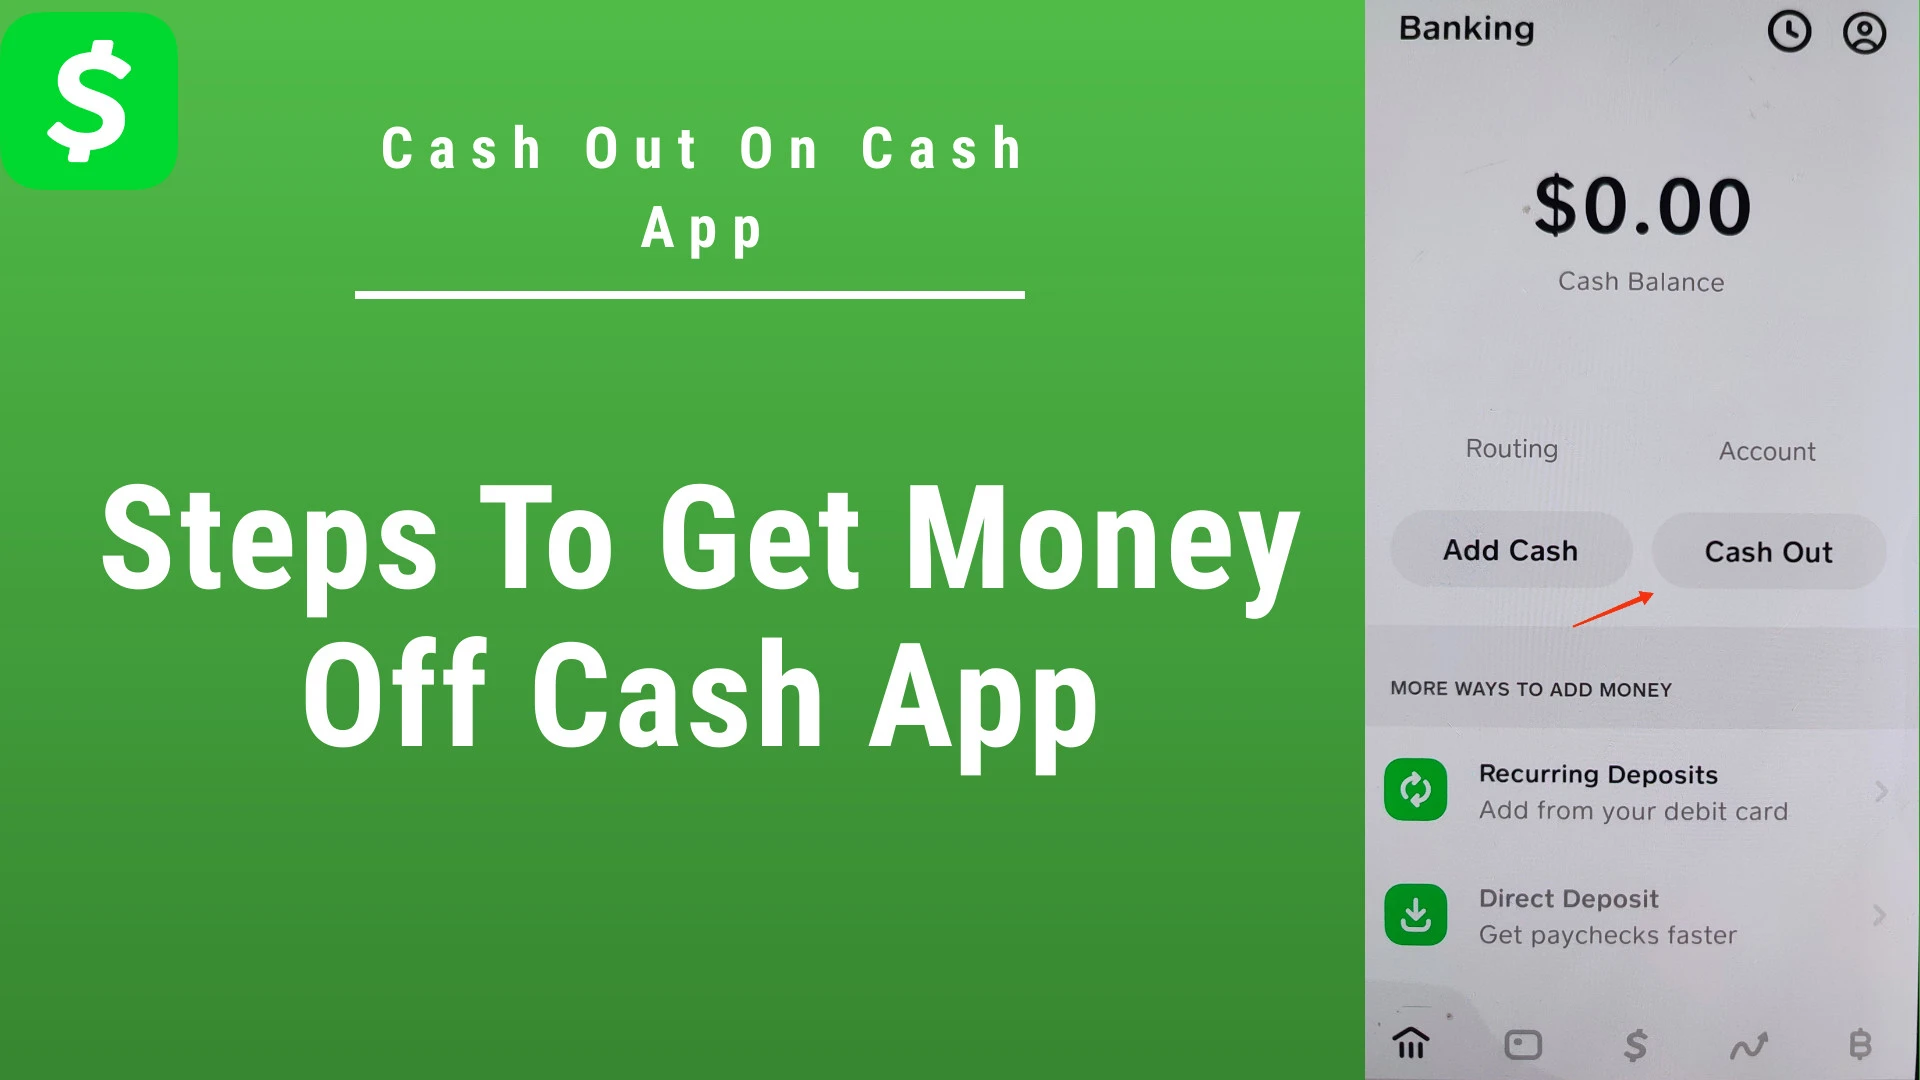 cash app cash out, cash out on cash app, how to withdraw money on cash
app, how to get money off cash app, how to cash out on cash app, what does cash out
mean on cash app, how to get money off cash app without card, how to get money off cash
app without bank